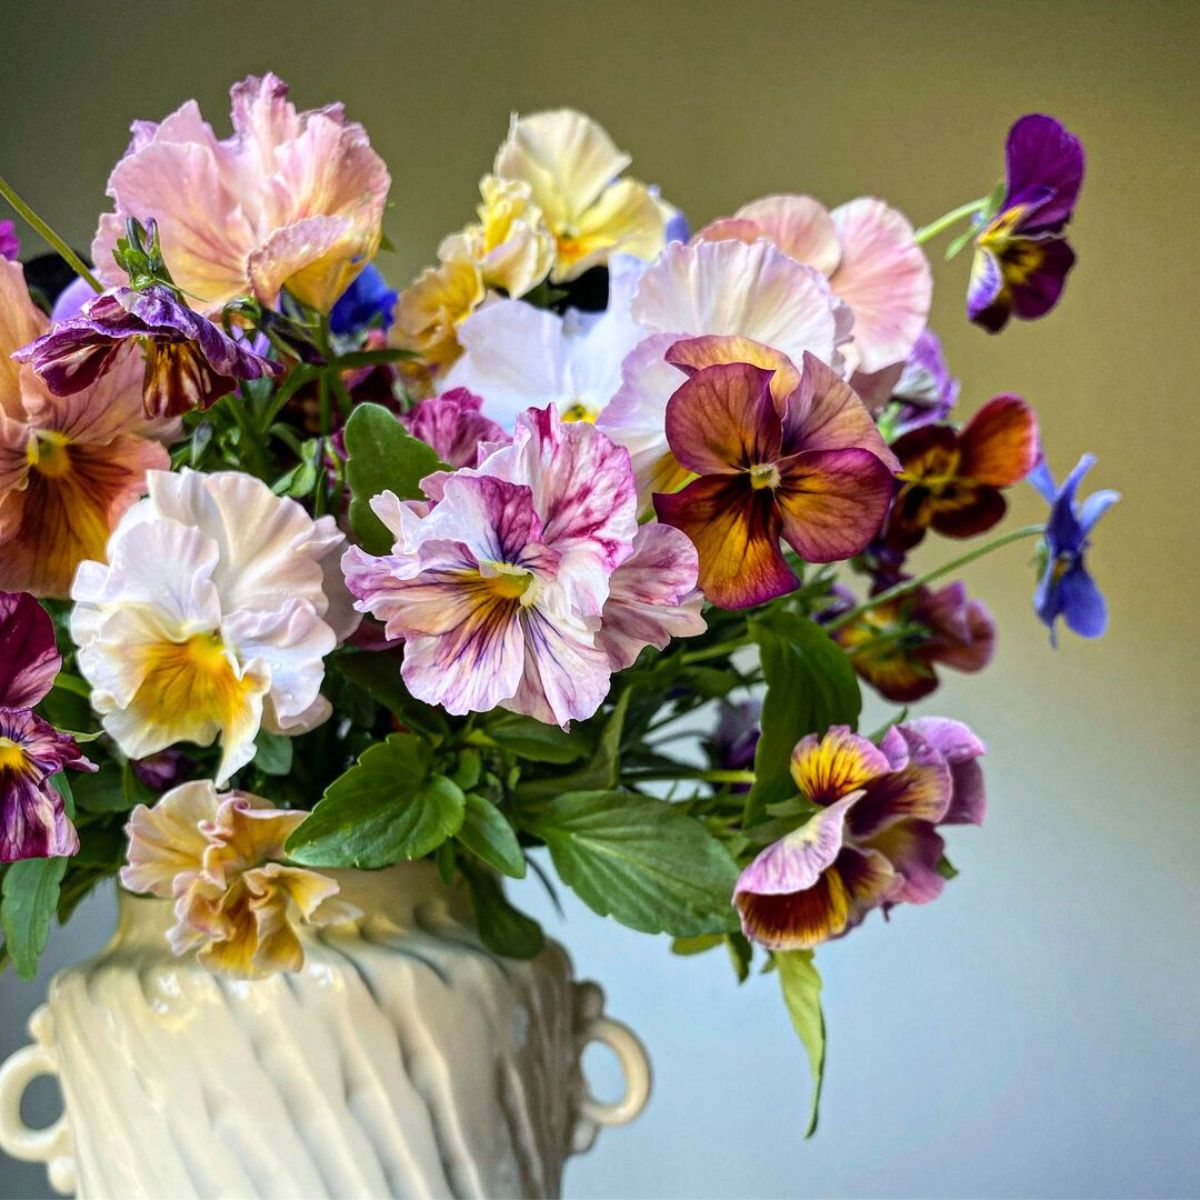 Beautiful pansies by Three Brothers Blooms farm